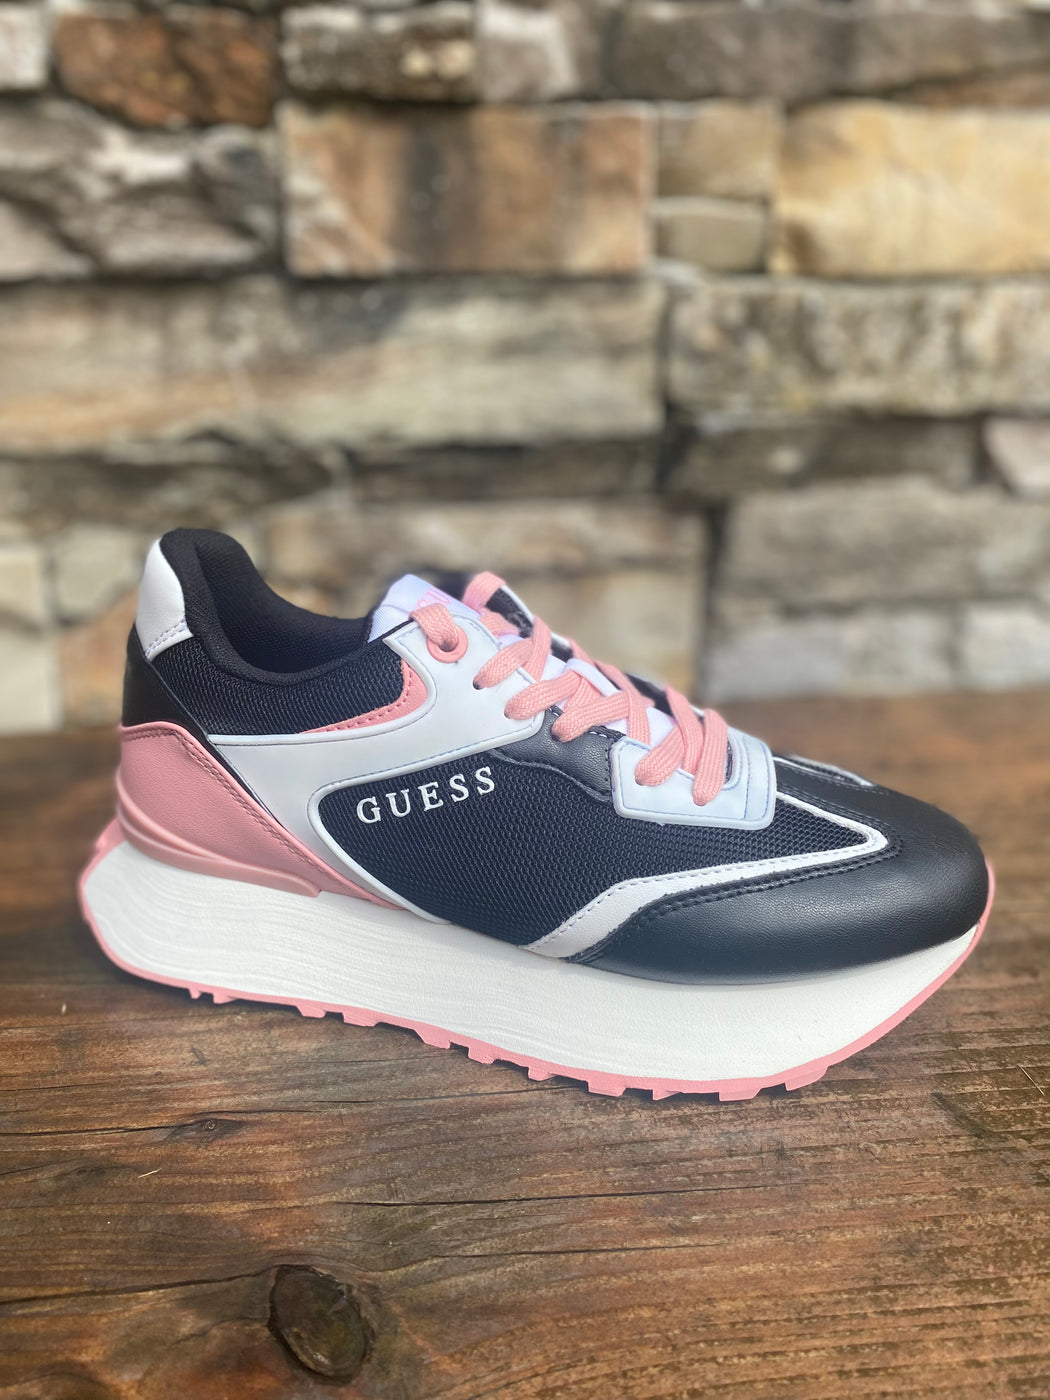 FL7UCHELE12 Guess black pink trainers